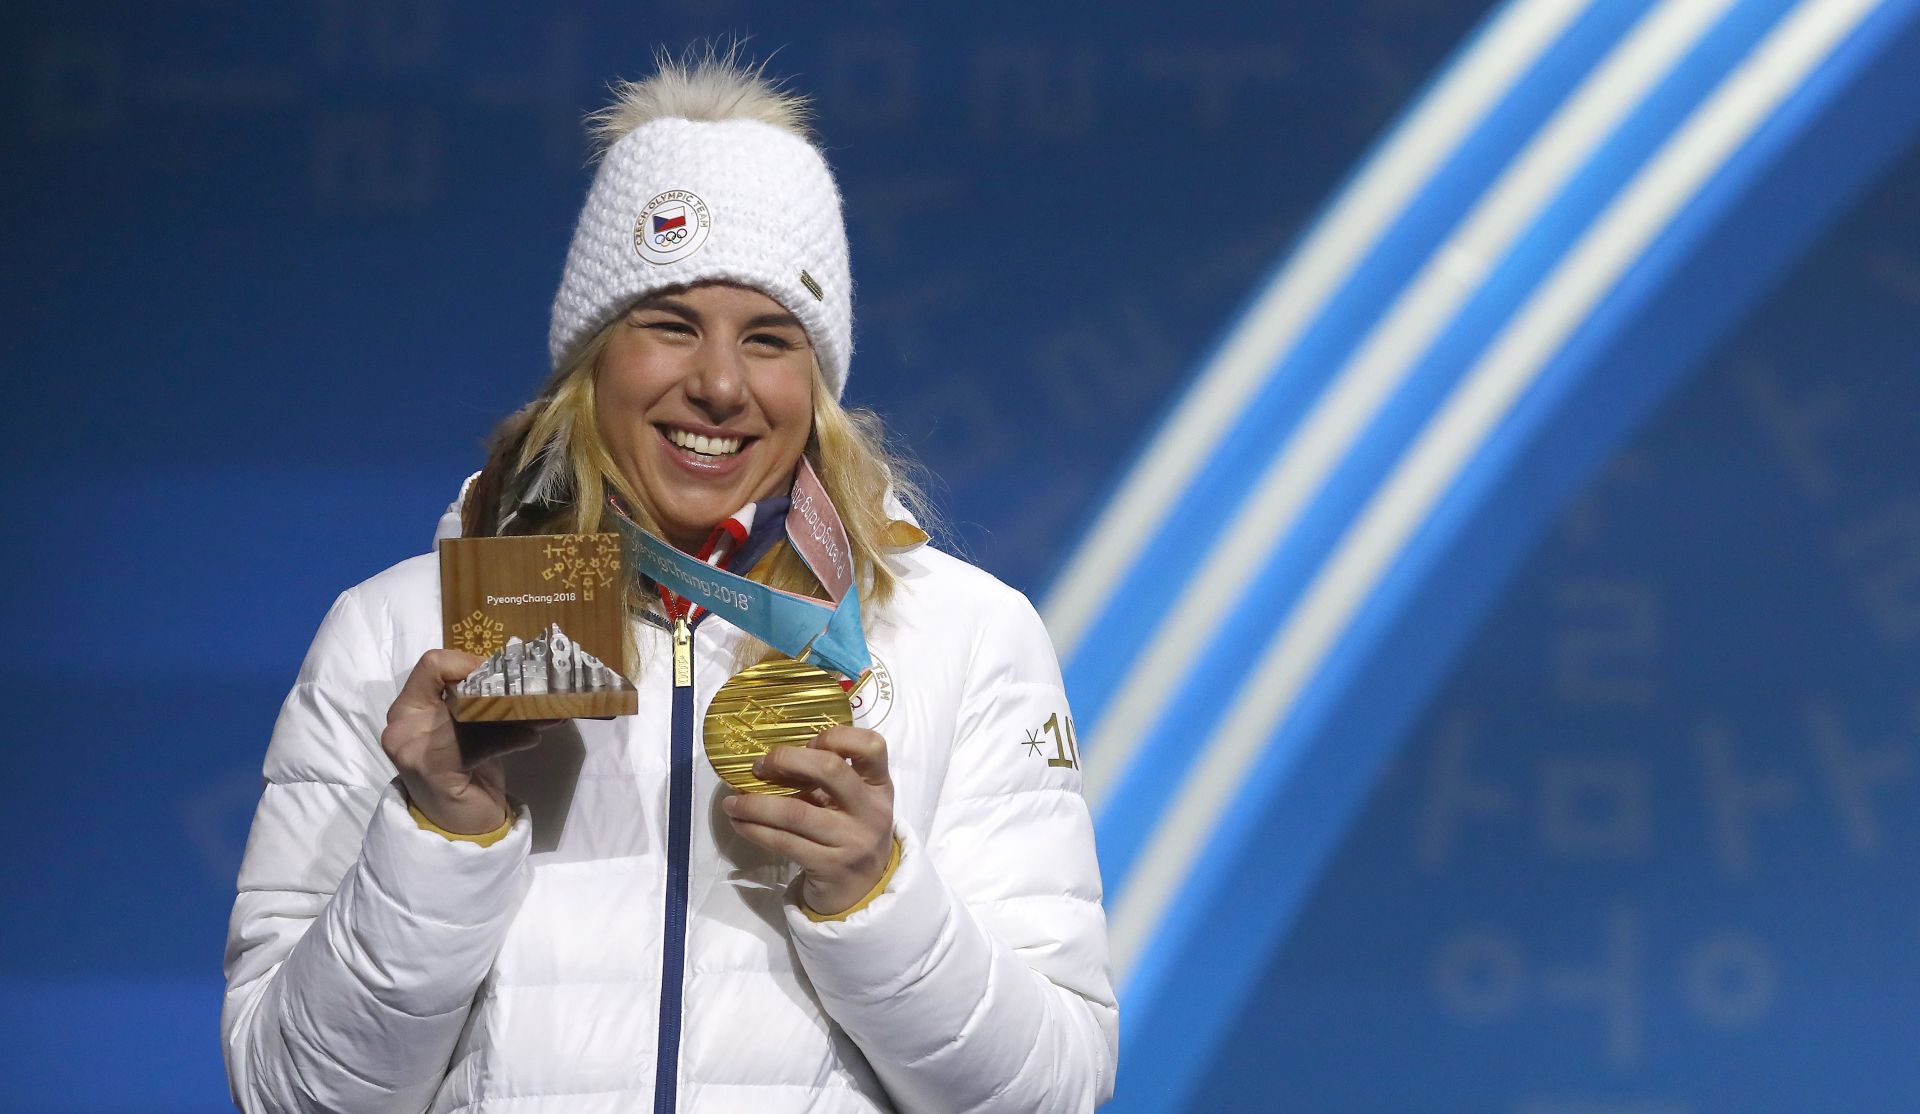 epa06560580 Gold medalist Ester Ledecka of the Czech Republic during the medal ceremony for the women's Snowboard Parallel Giant Slalom (PGS) event at the PyeongChang 2018 Olympic Games, South Korea, 24 February 2018.  EPA/DIEGO AZUBEL